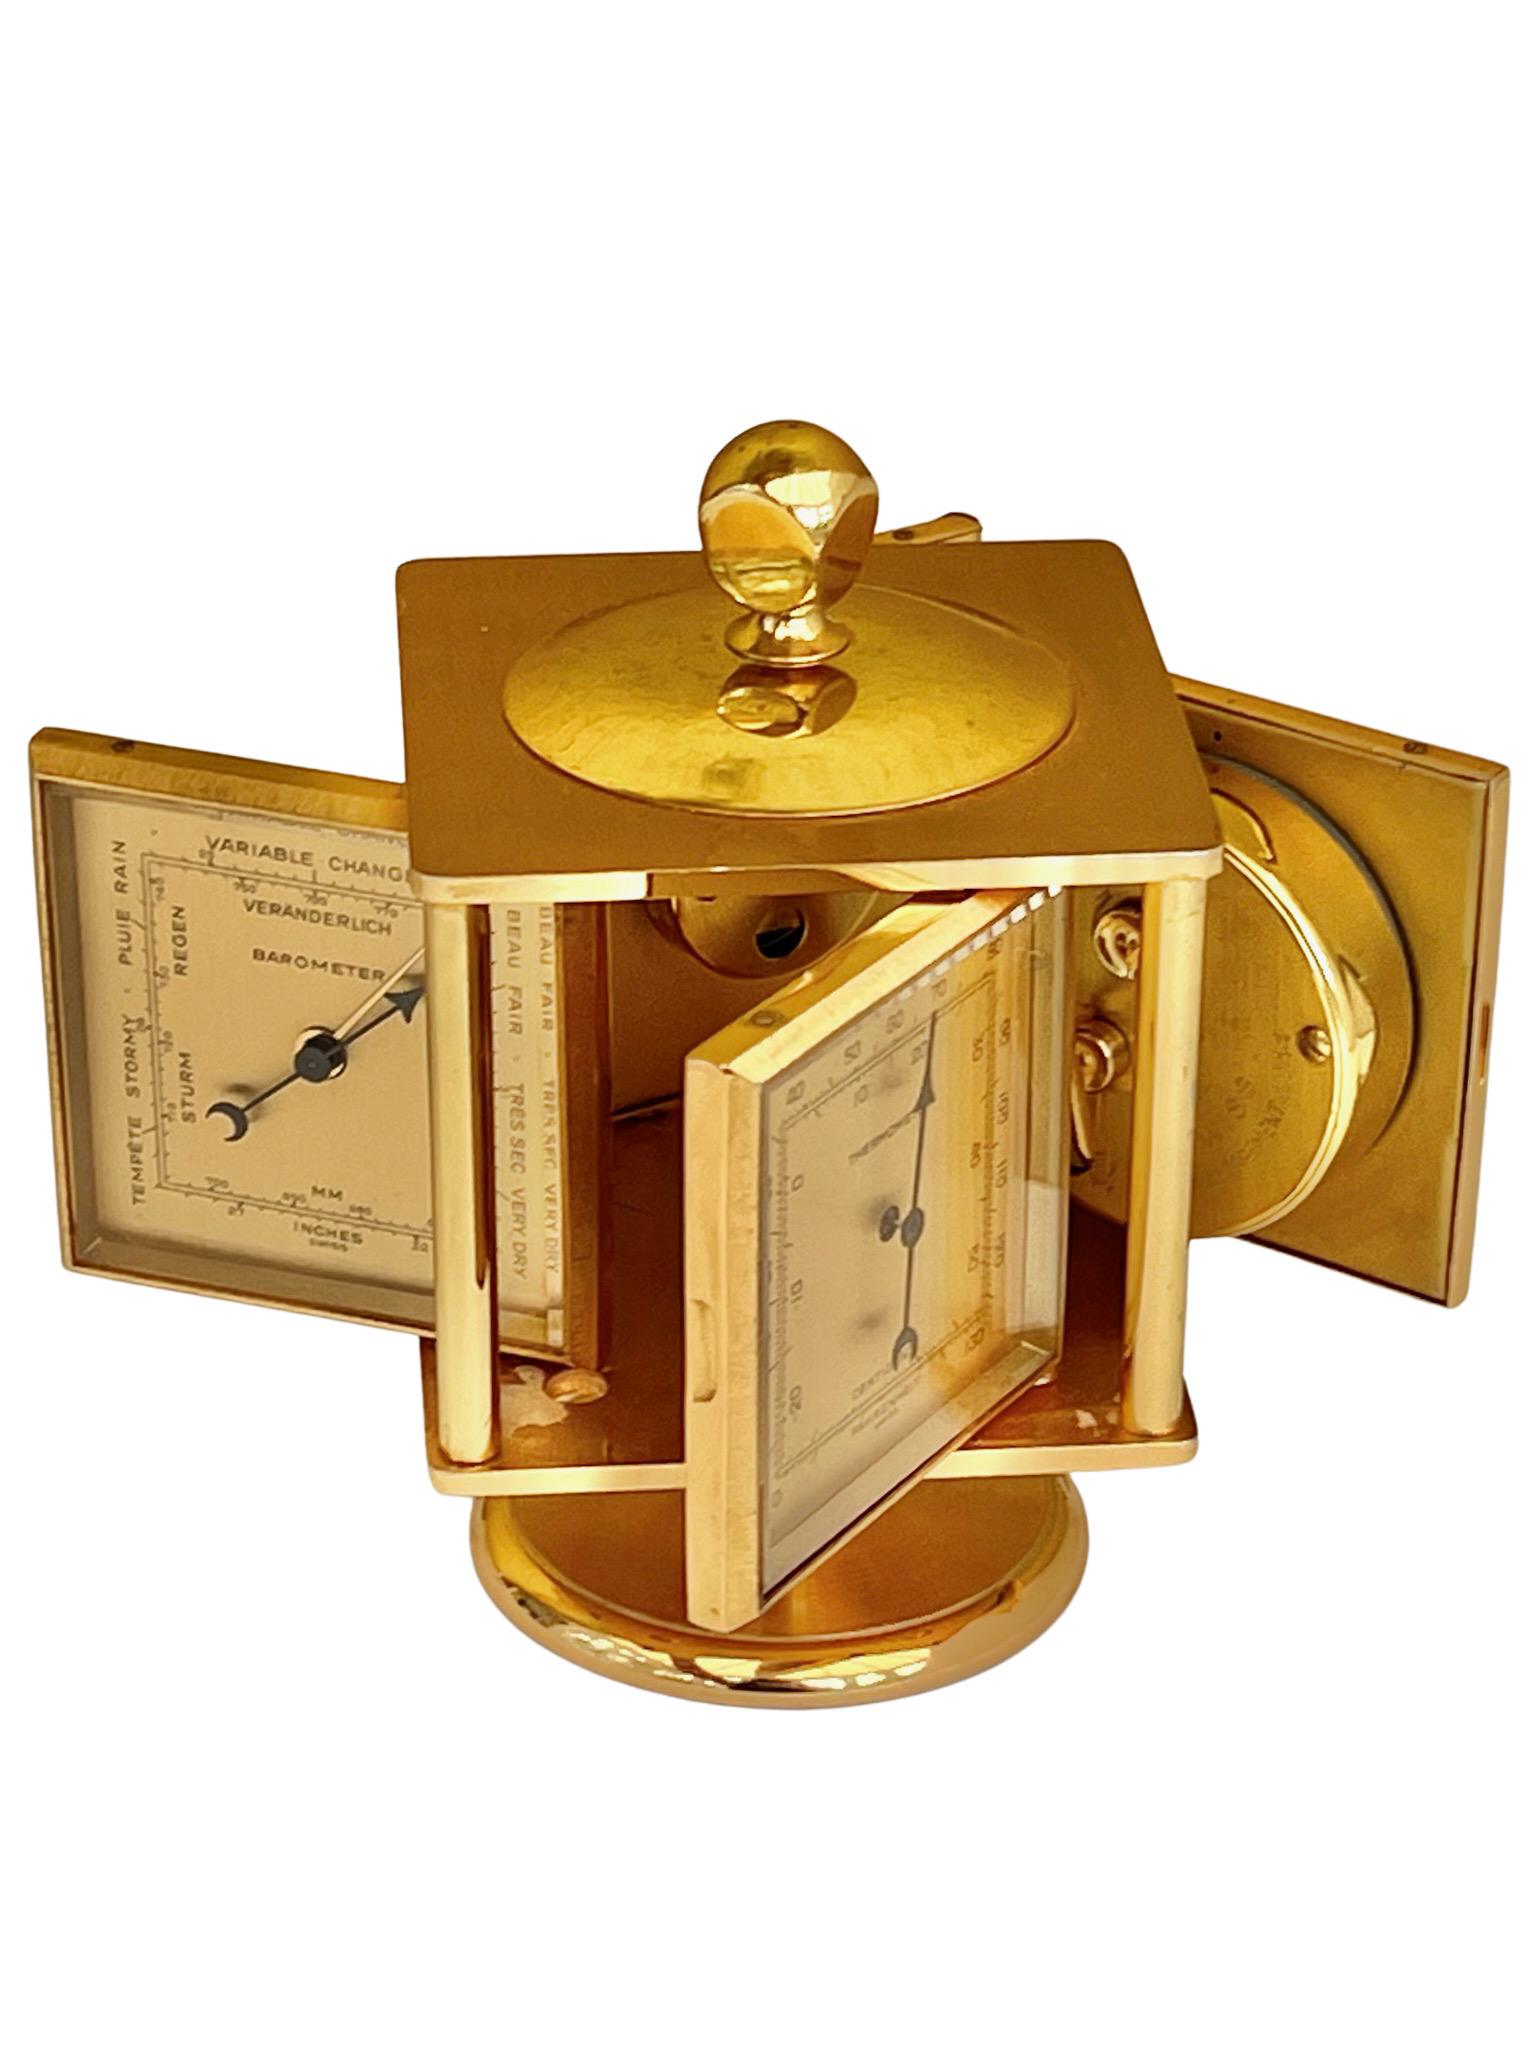 Imhof Midcentury Gilt Desk Clock and Weather Compendium For Sale 9